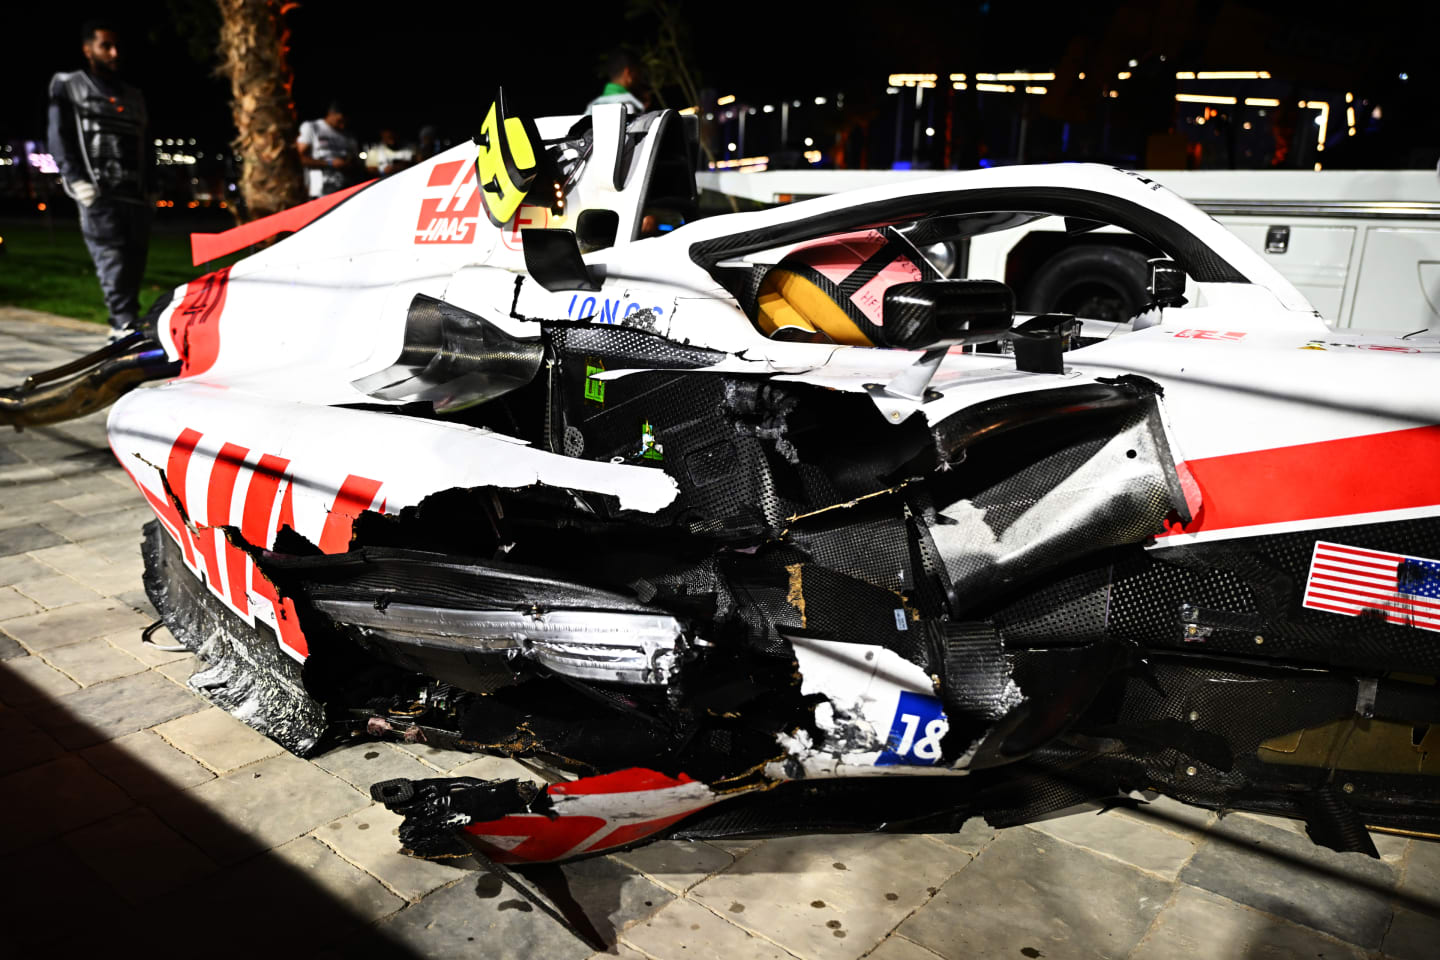 JEDDAH, SAUDI ARABIA - MARCH 26: The wrecked car of Mick Schumacher of Germany and Haas F1 is pictured at the side of the track after a crash during qualifying ahead of the F1 Grand Prix of Saudi Arabia at the Jeddah Corniche Circuit on March 26, 2022 in Jeddah, Saudi Arabia. (Photo by Clive Mason/Getty Images)